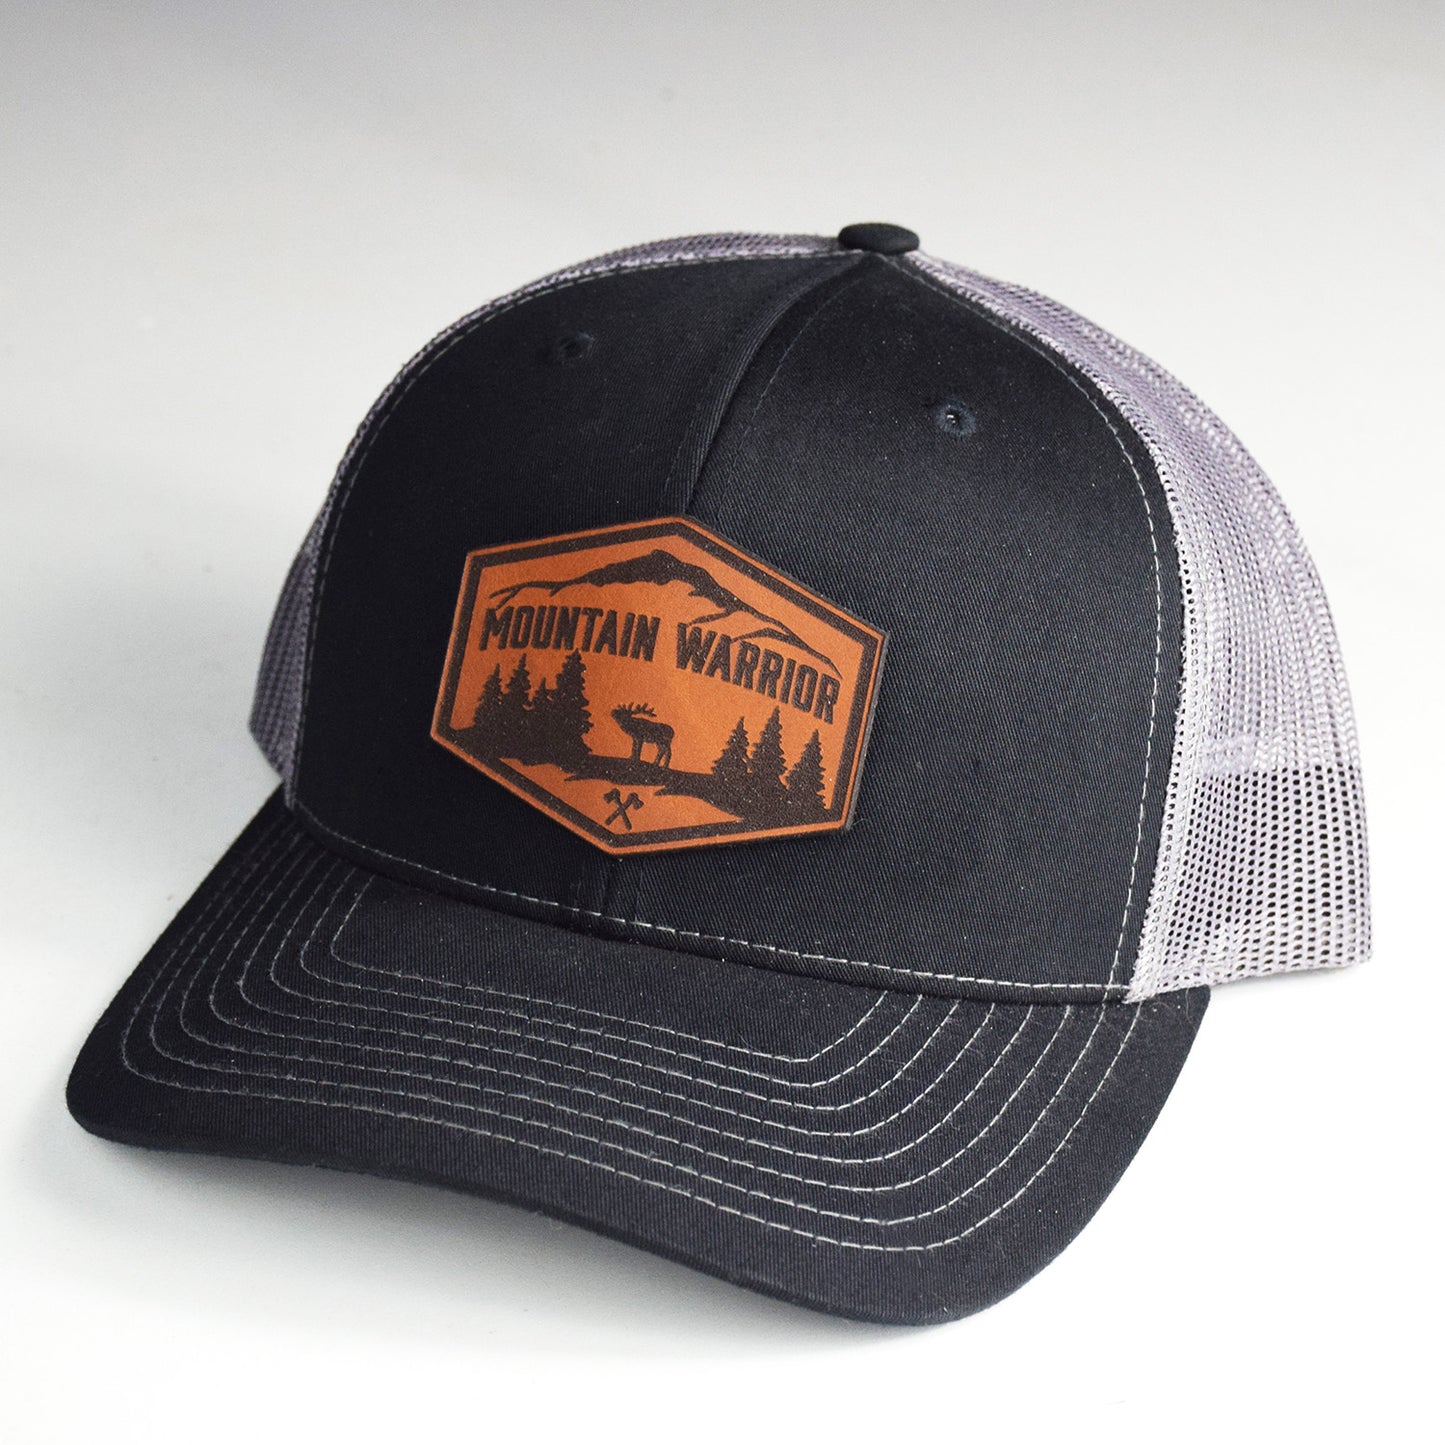 Mountain Warrior Logo Leather Patch Snapback